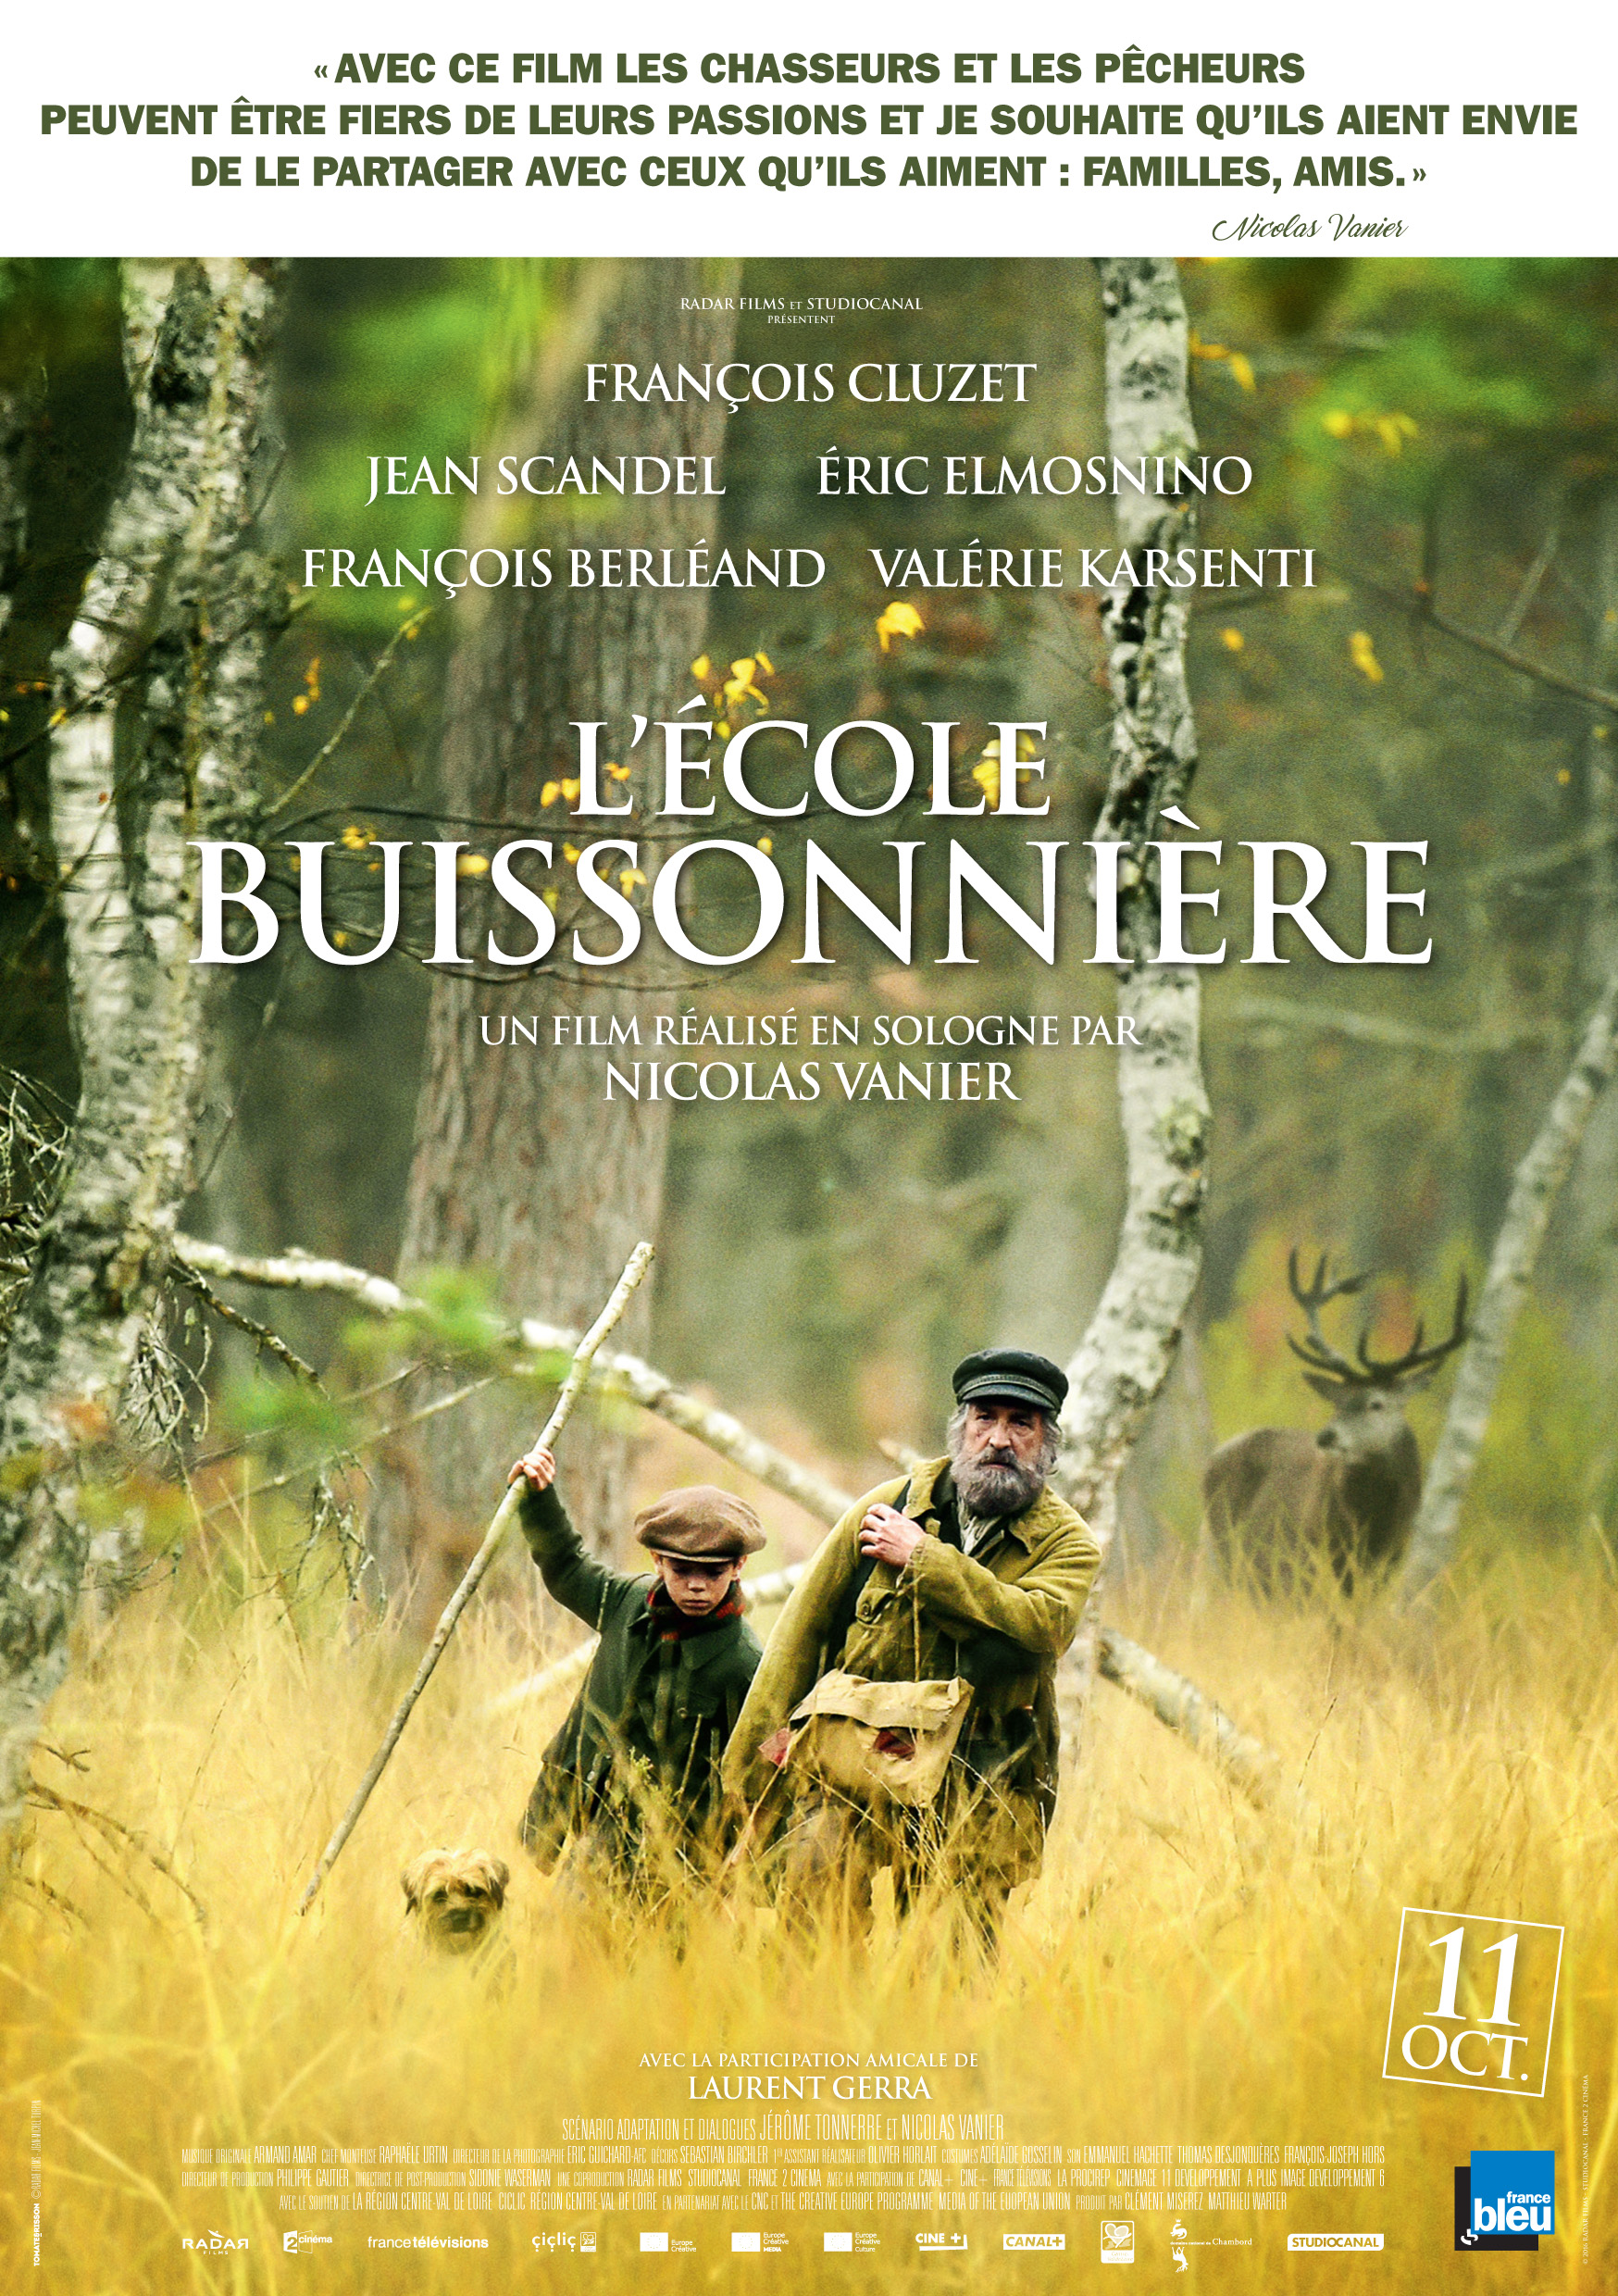 LECOLE BUISSONNIERE FEDERATION CHASSE A5 HDSTC